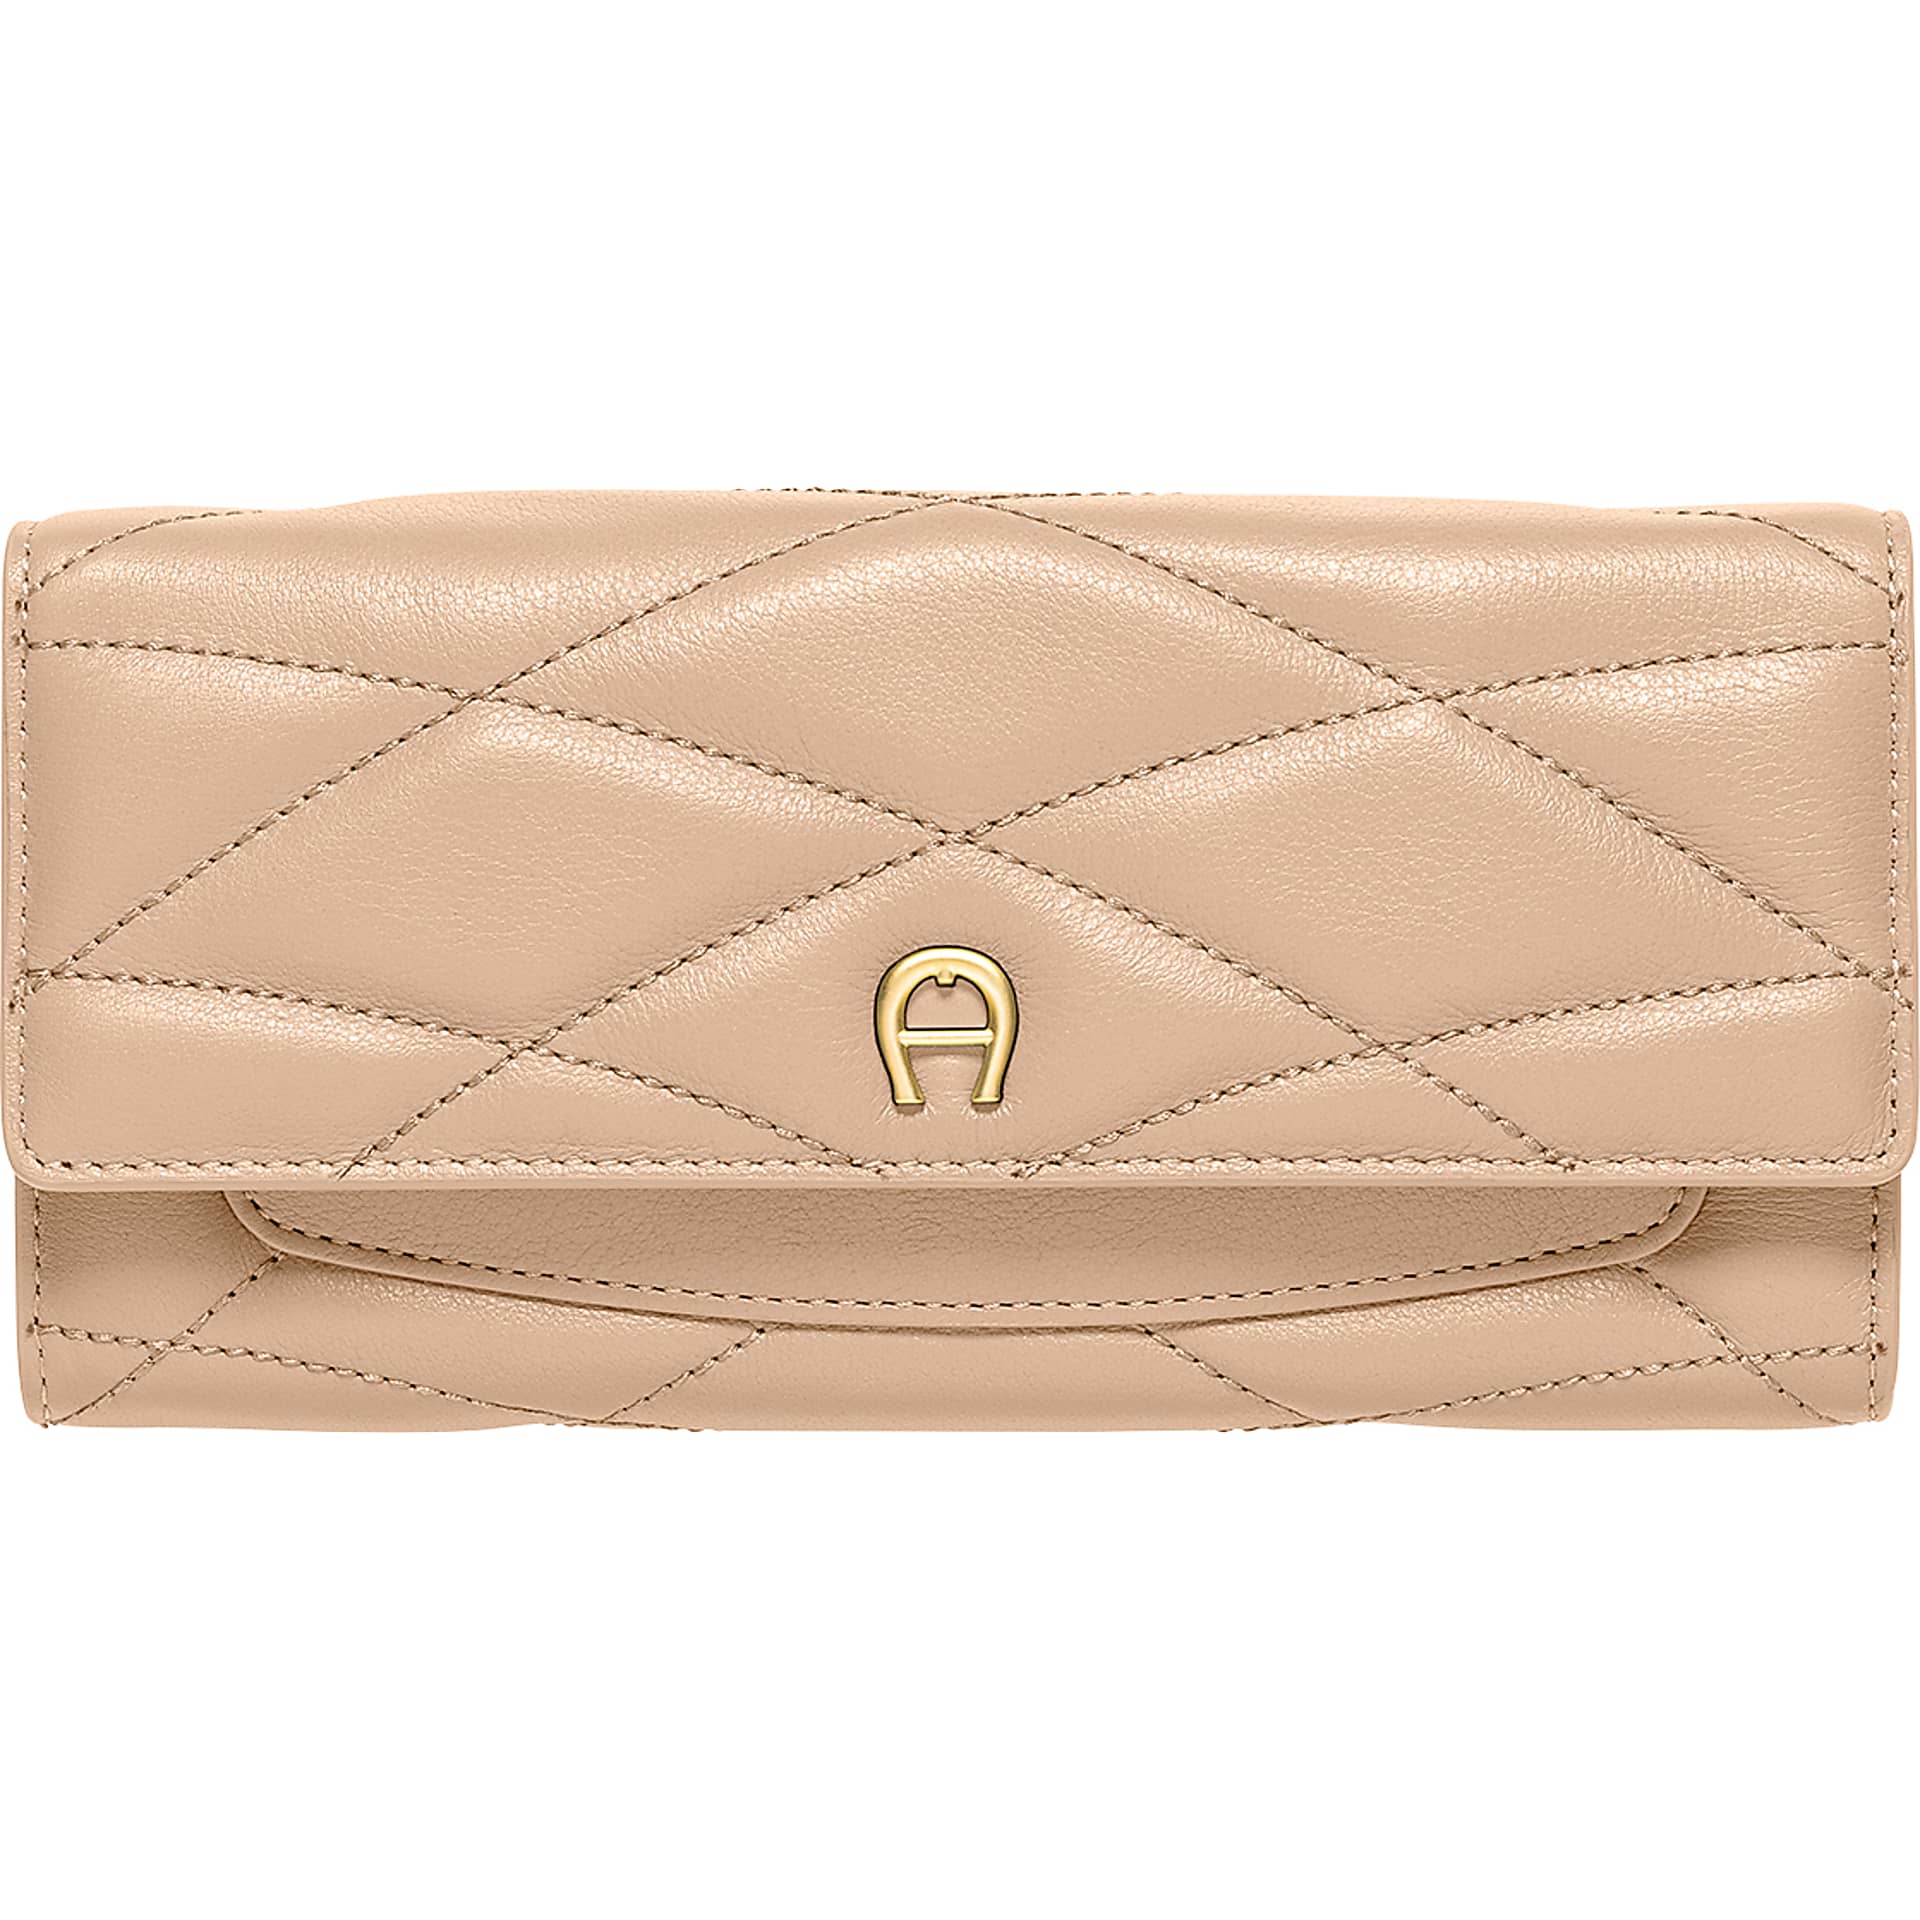 Maggie Pouch with shoulder strap almond beige - Leather Accessories - Women  - AIGNER Club